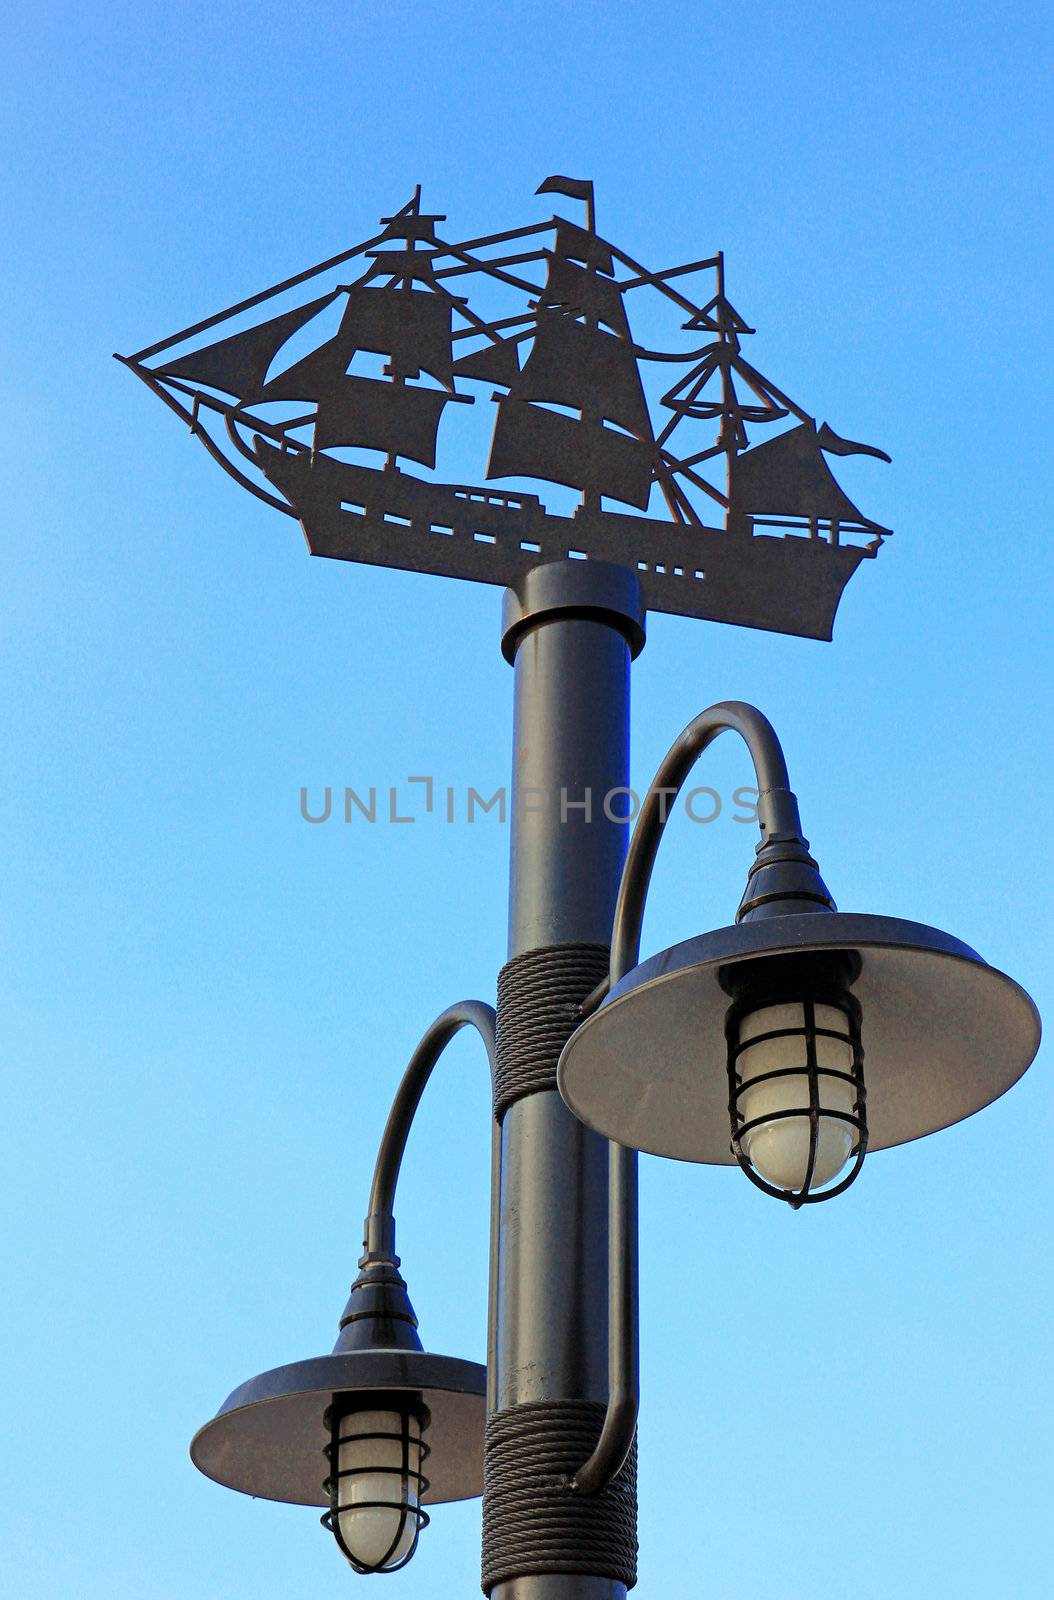 Decorative street lamp-post on blue sky by nuchylee